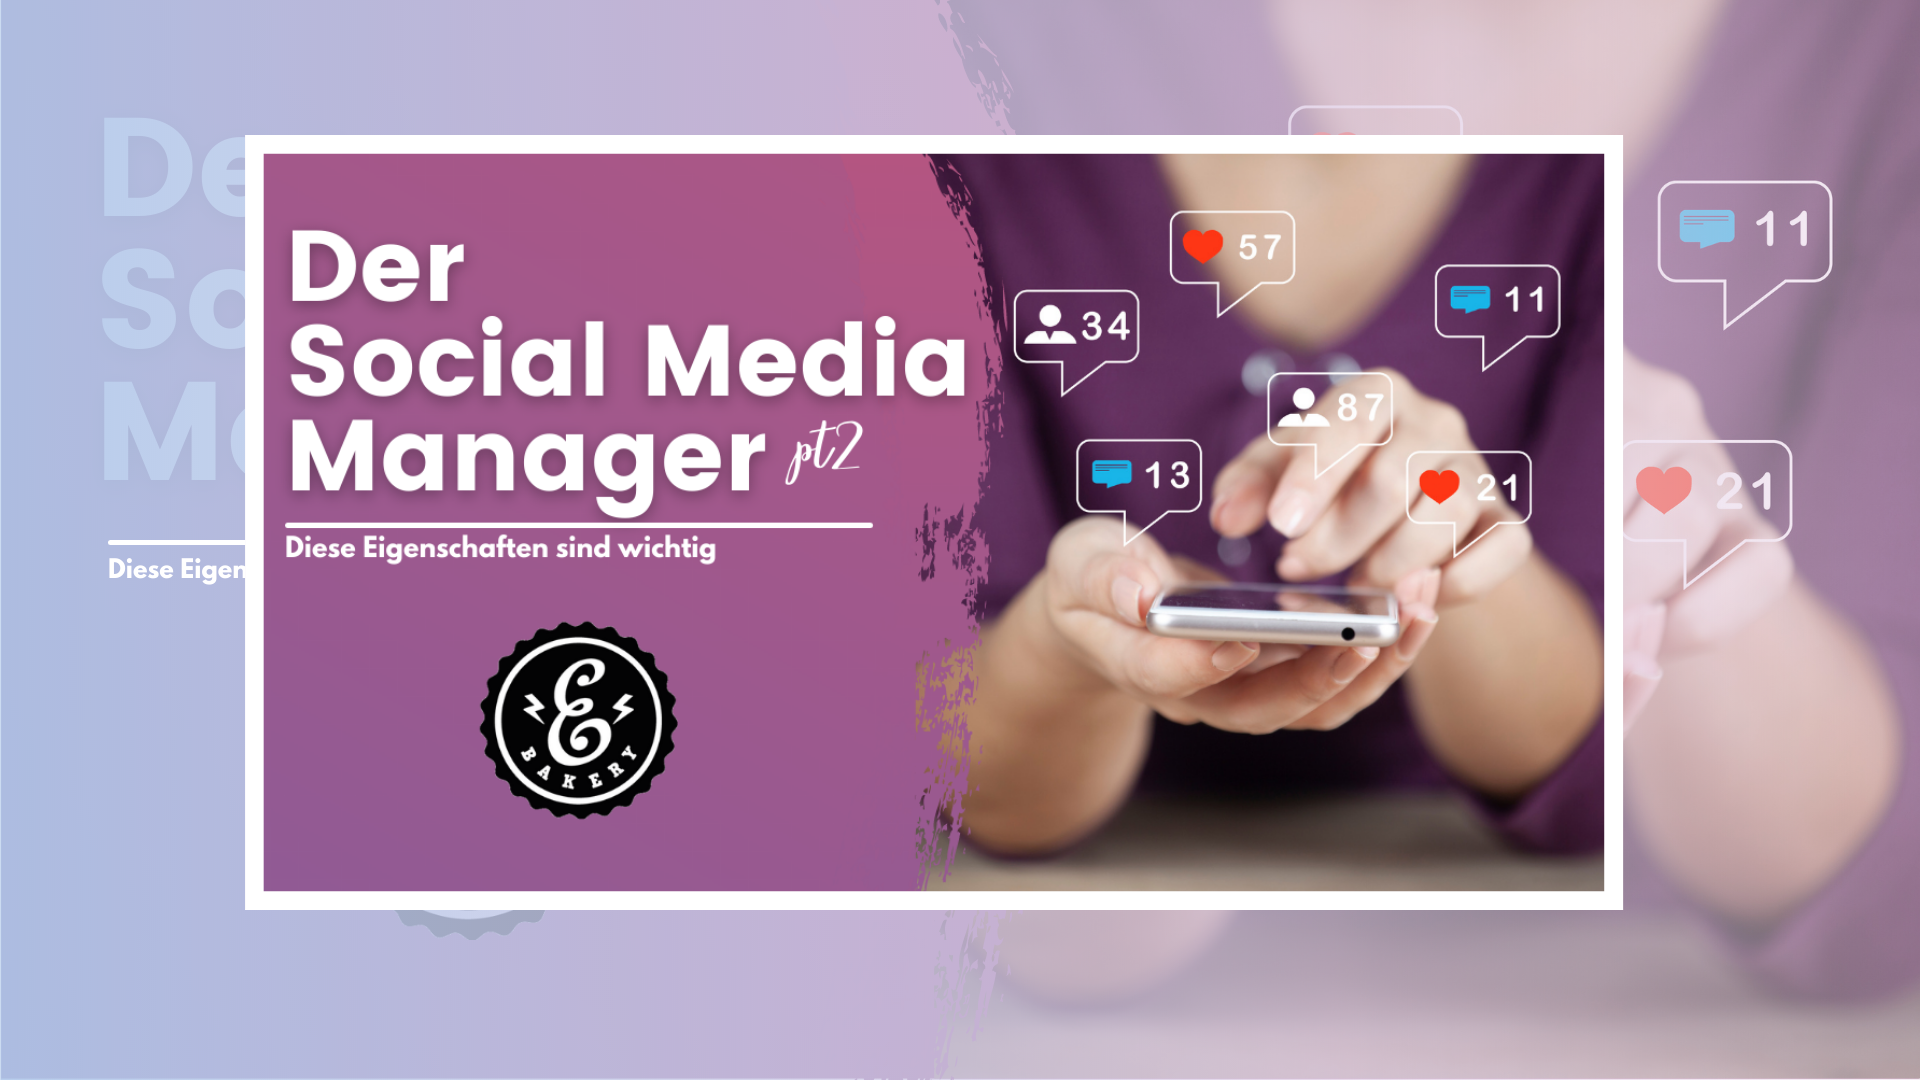 Social media manager pt2 – These are the qualities you should have